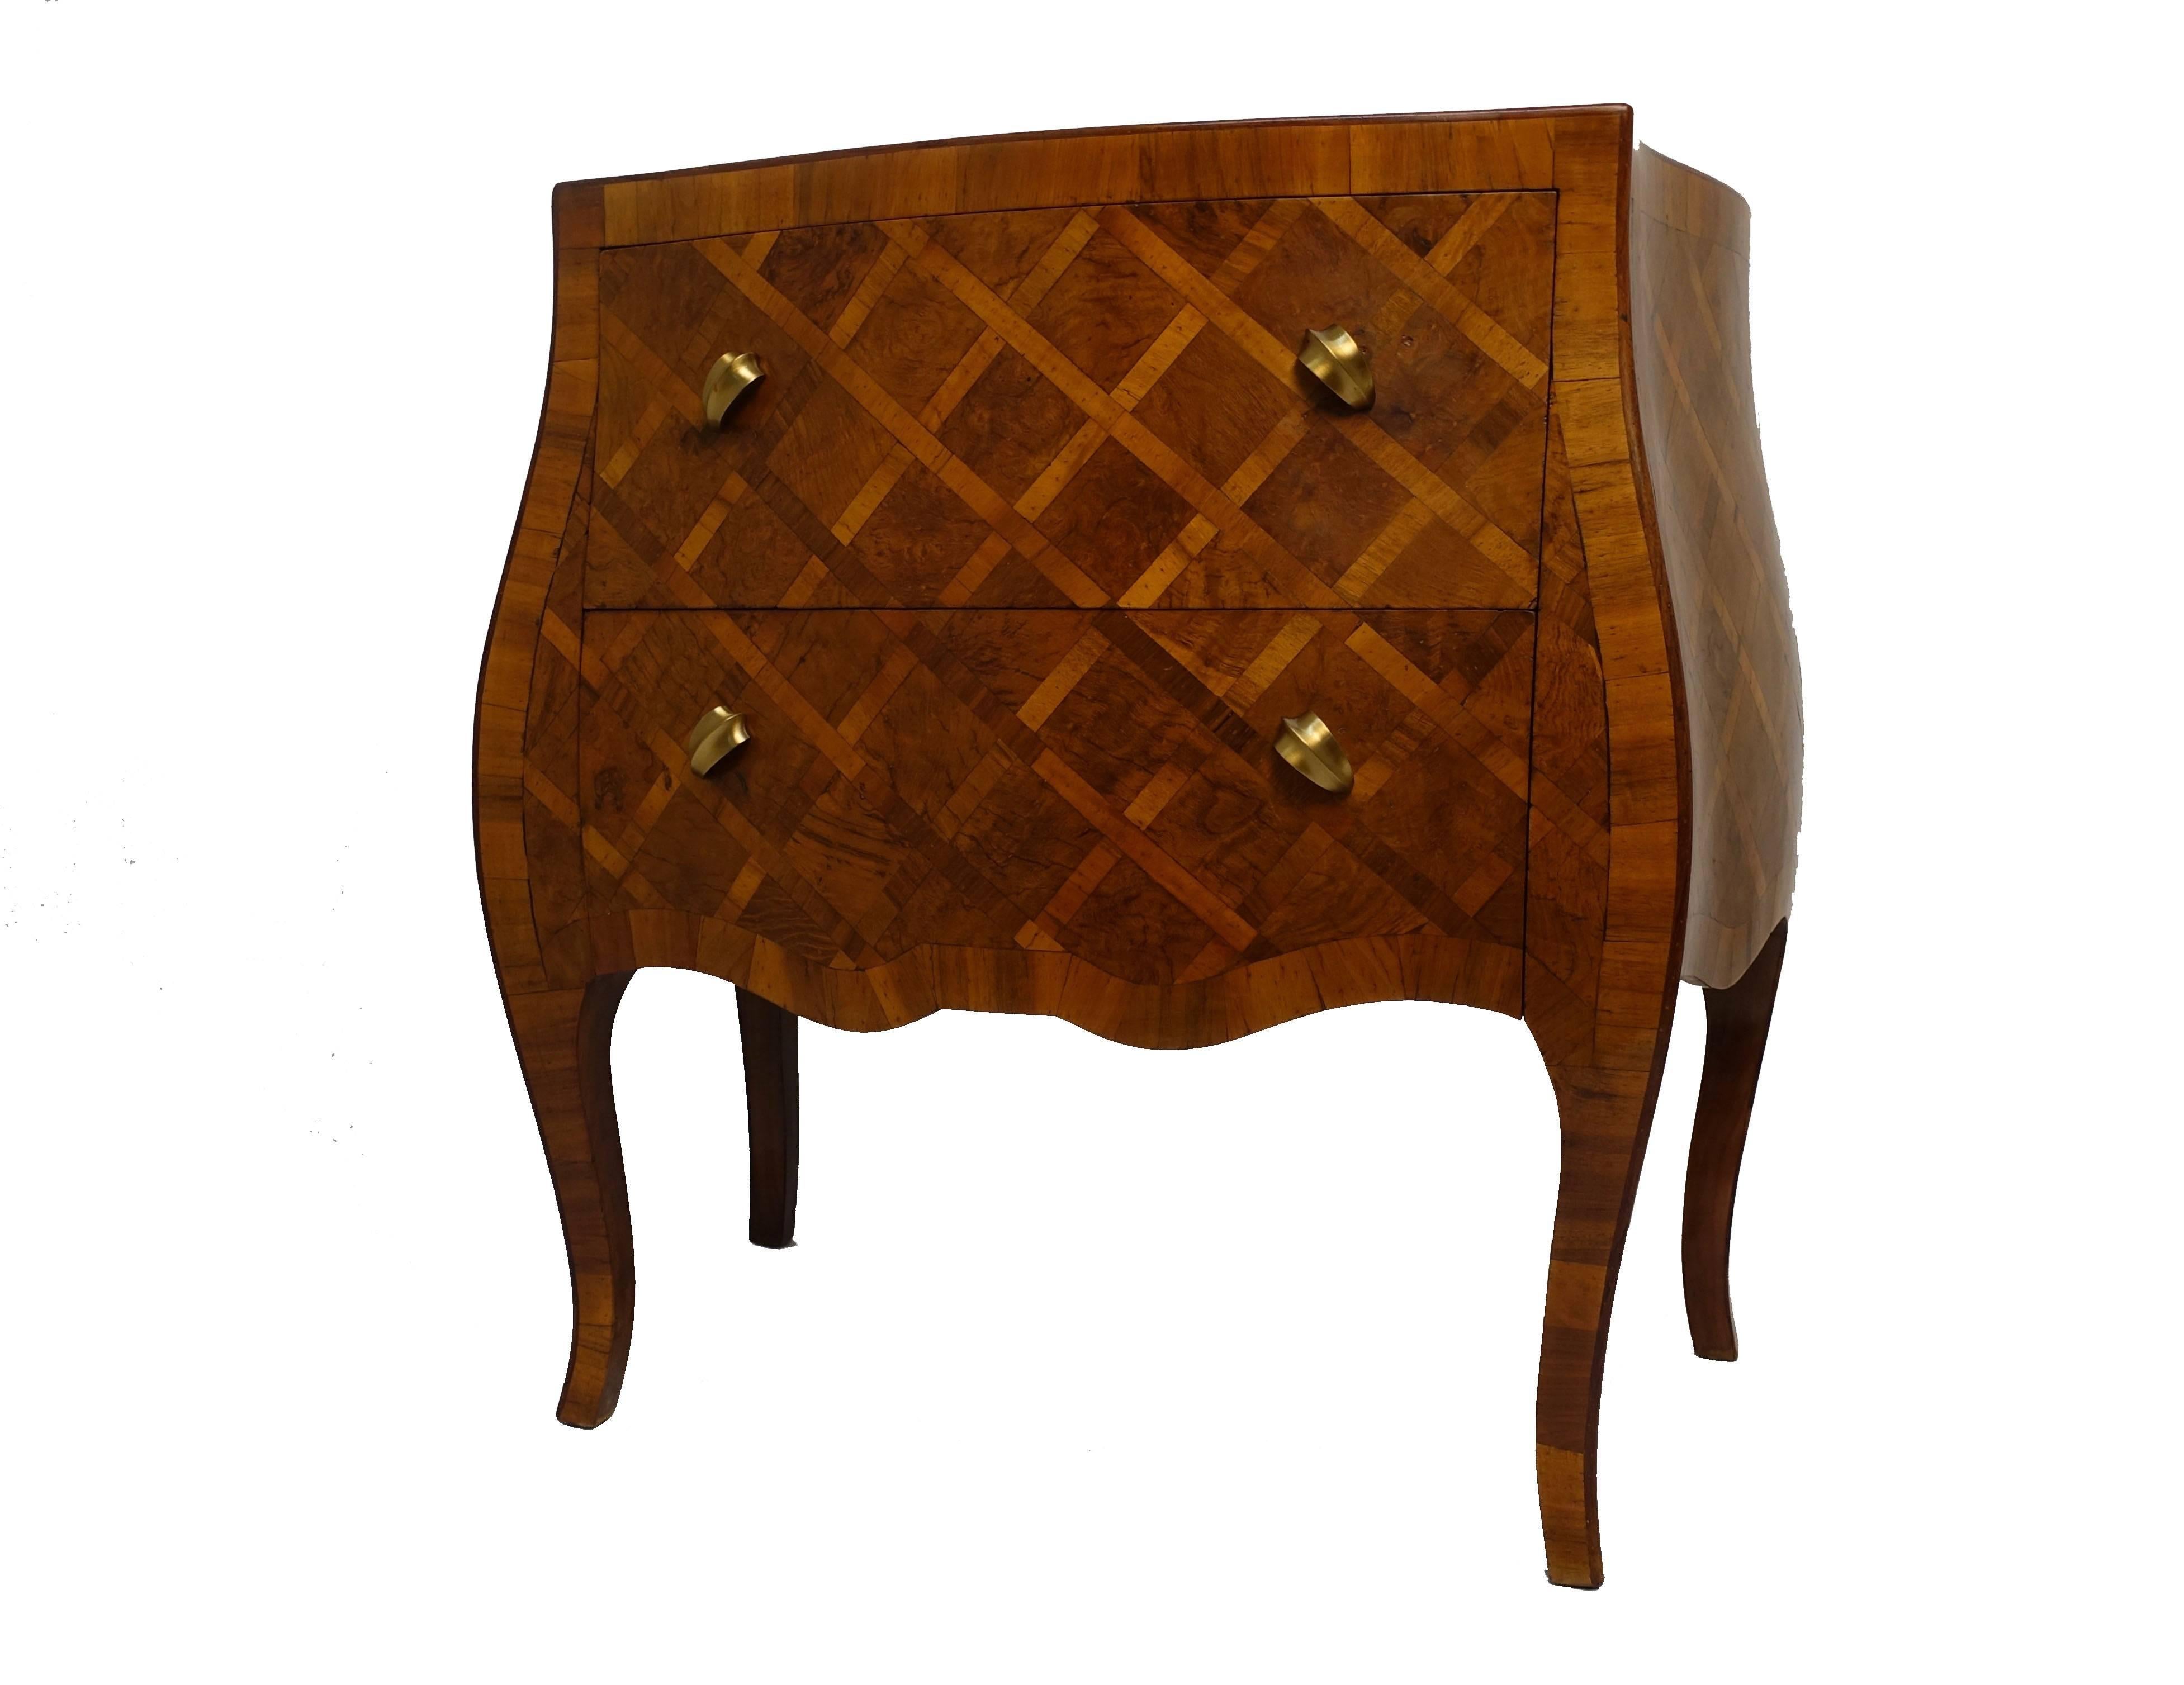 Rococo Italian Olivewood Bombe Commode with Parquetry Inlay